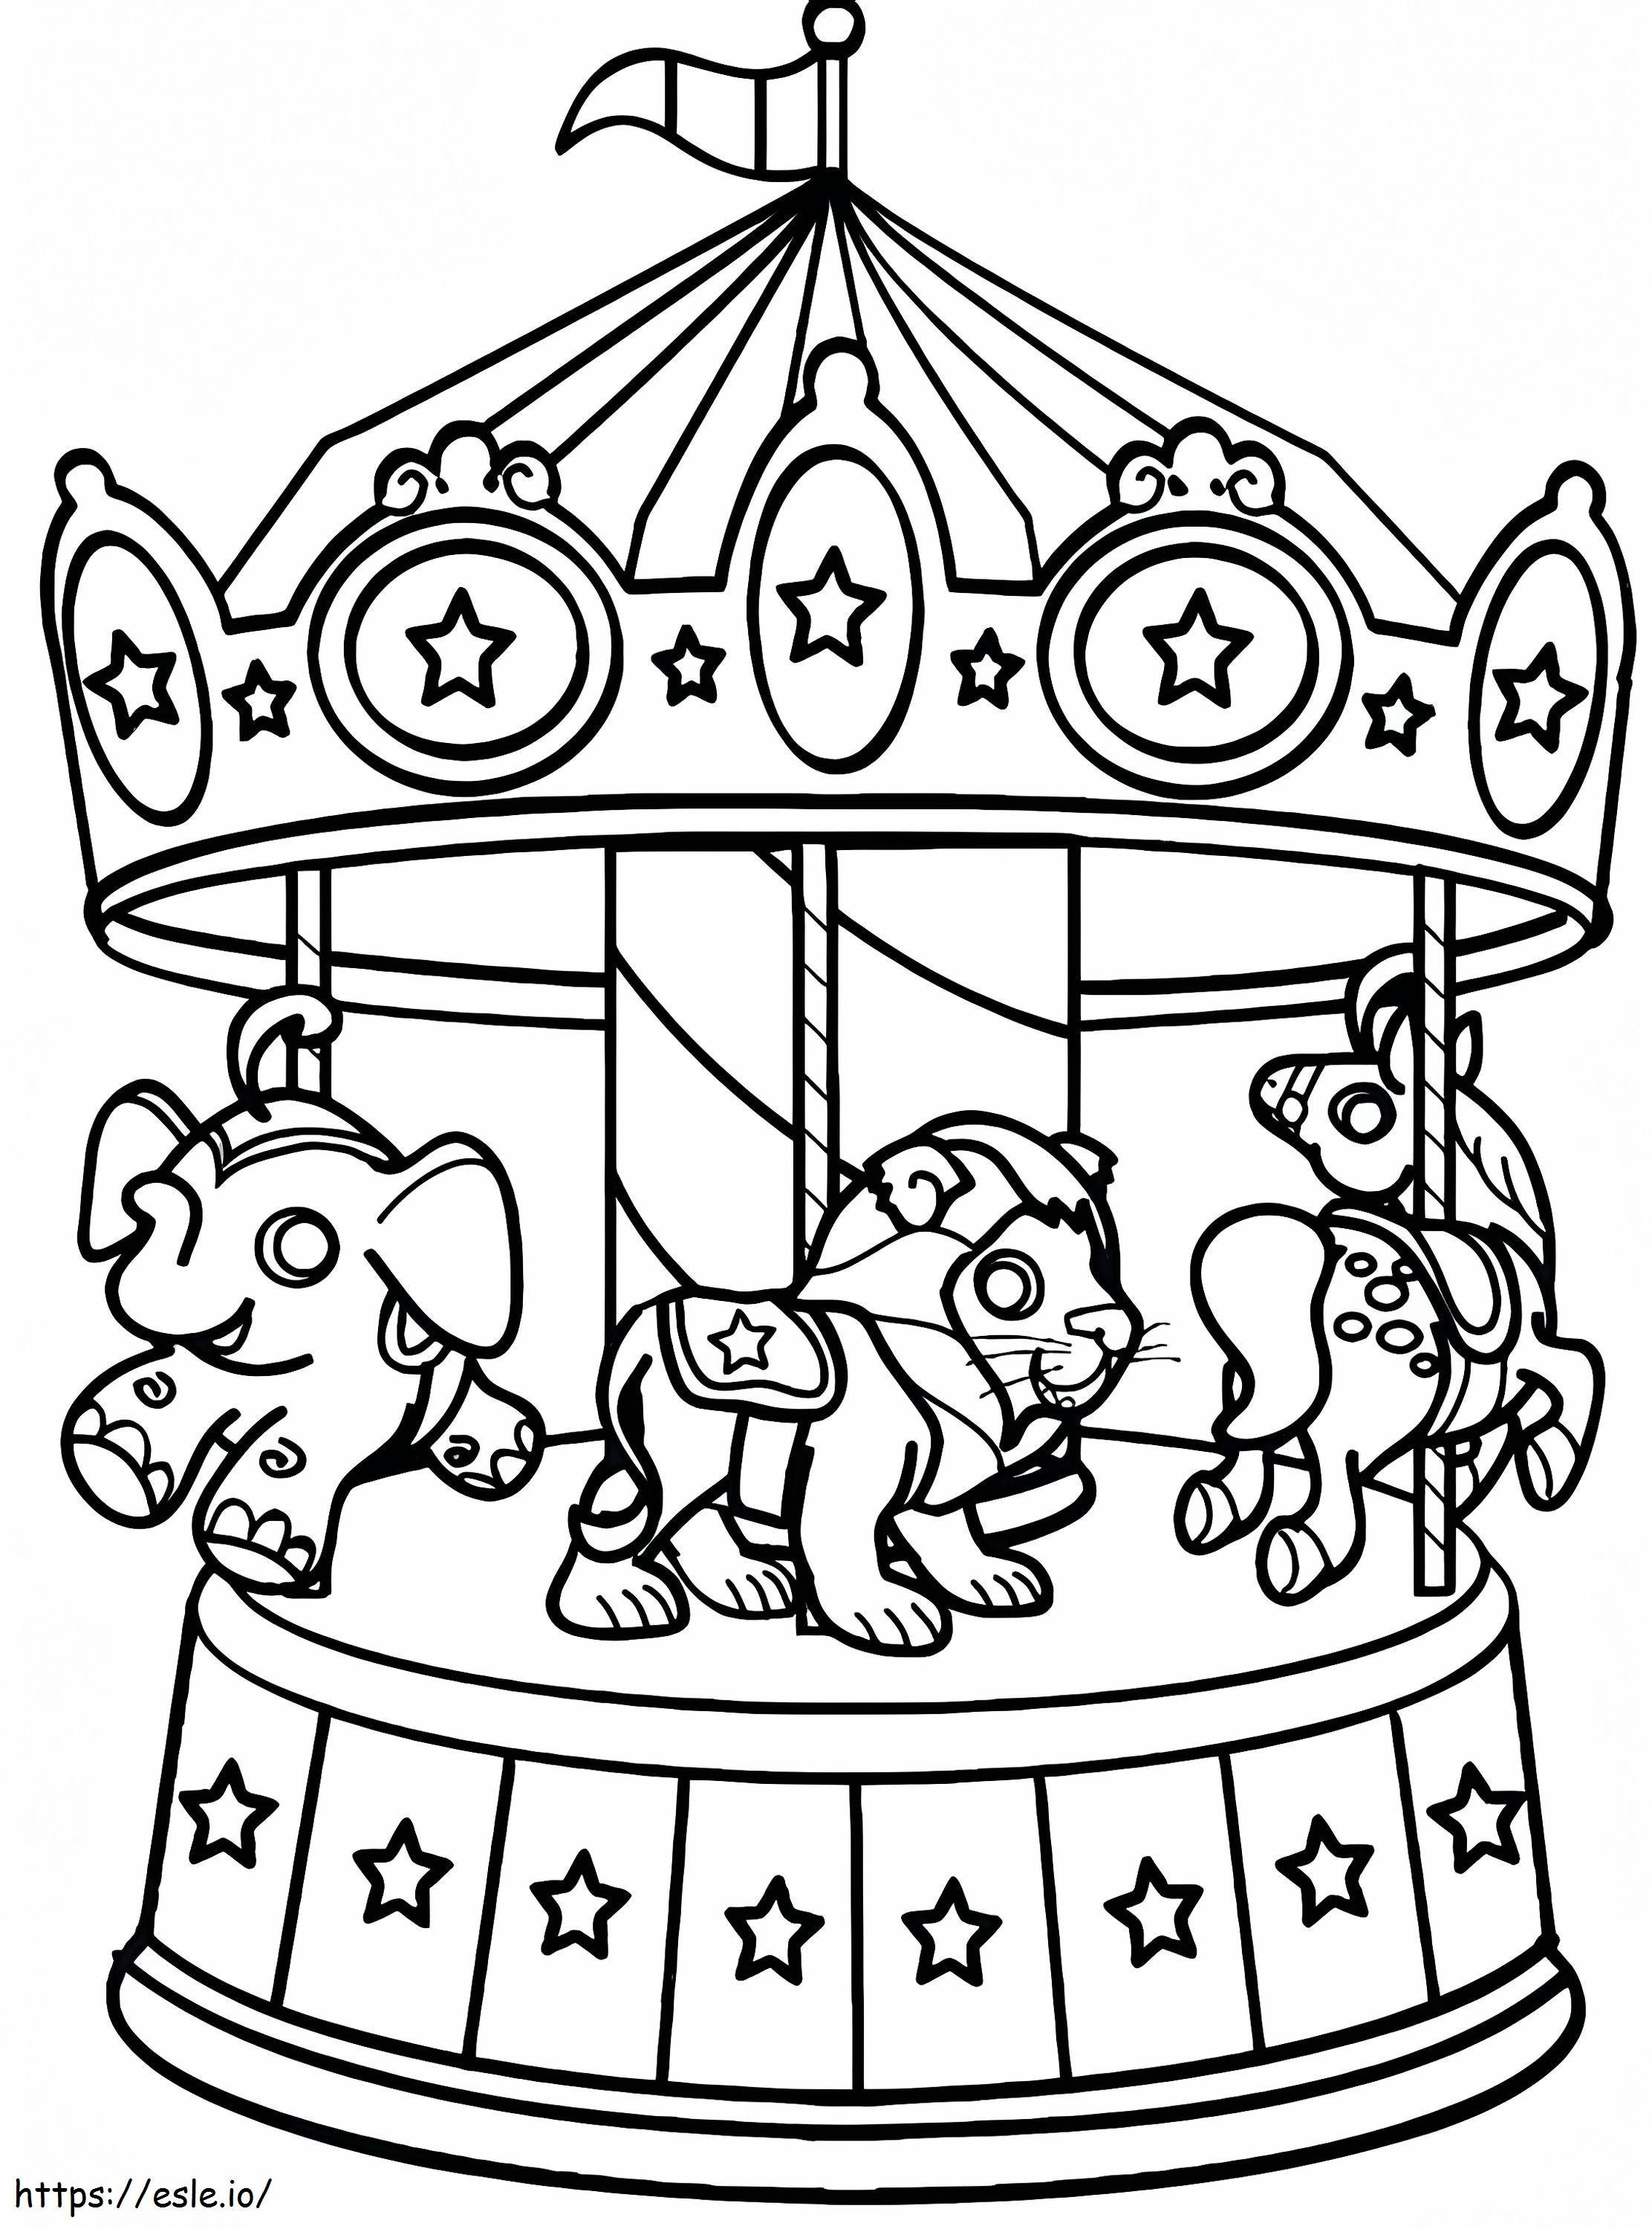 Adorable Carousel coloring page